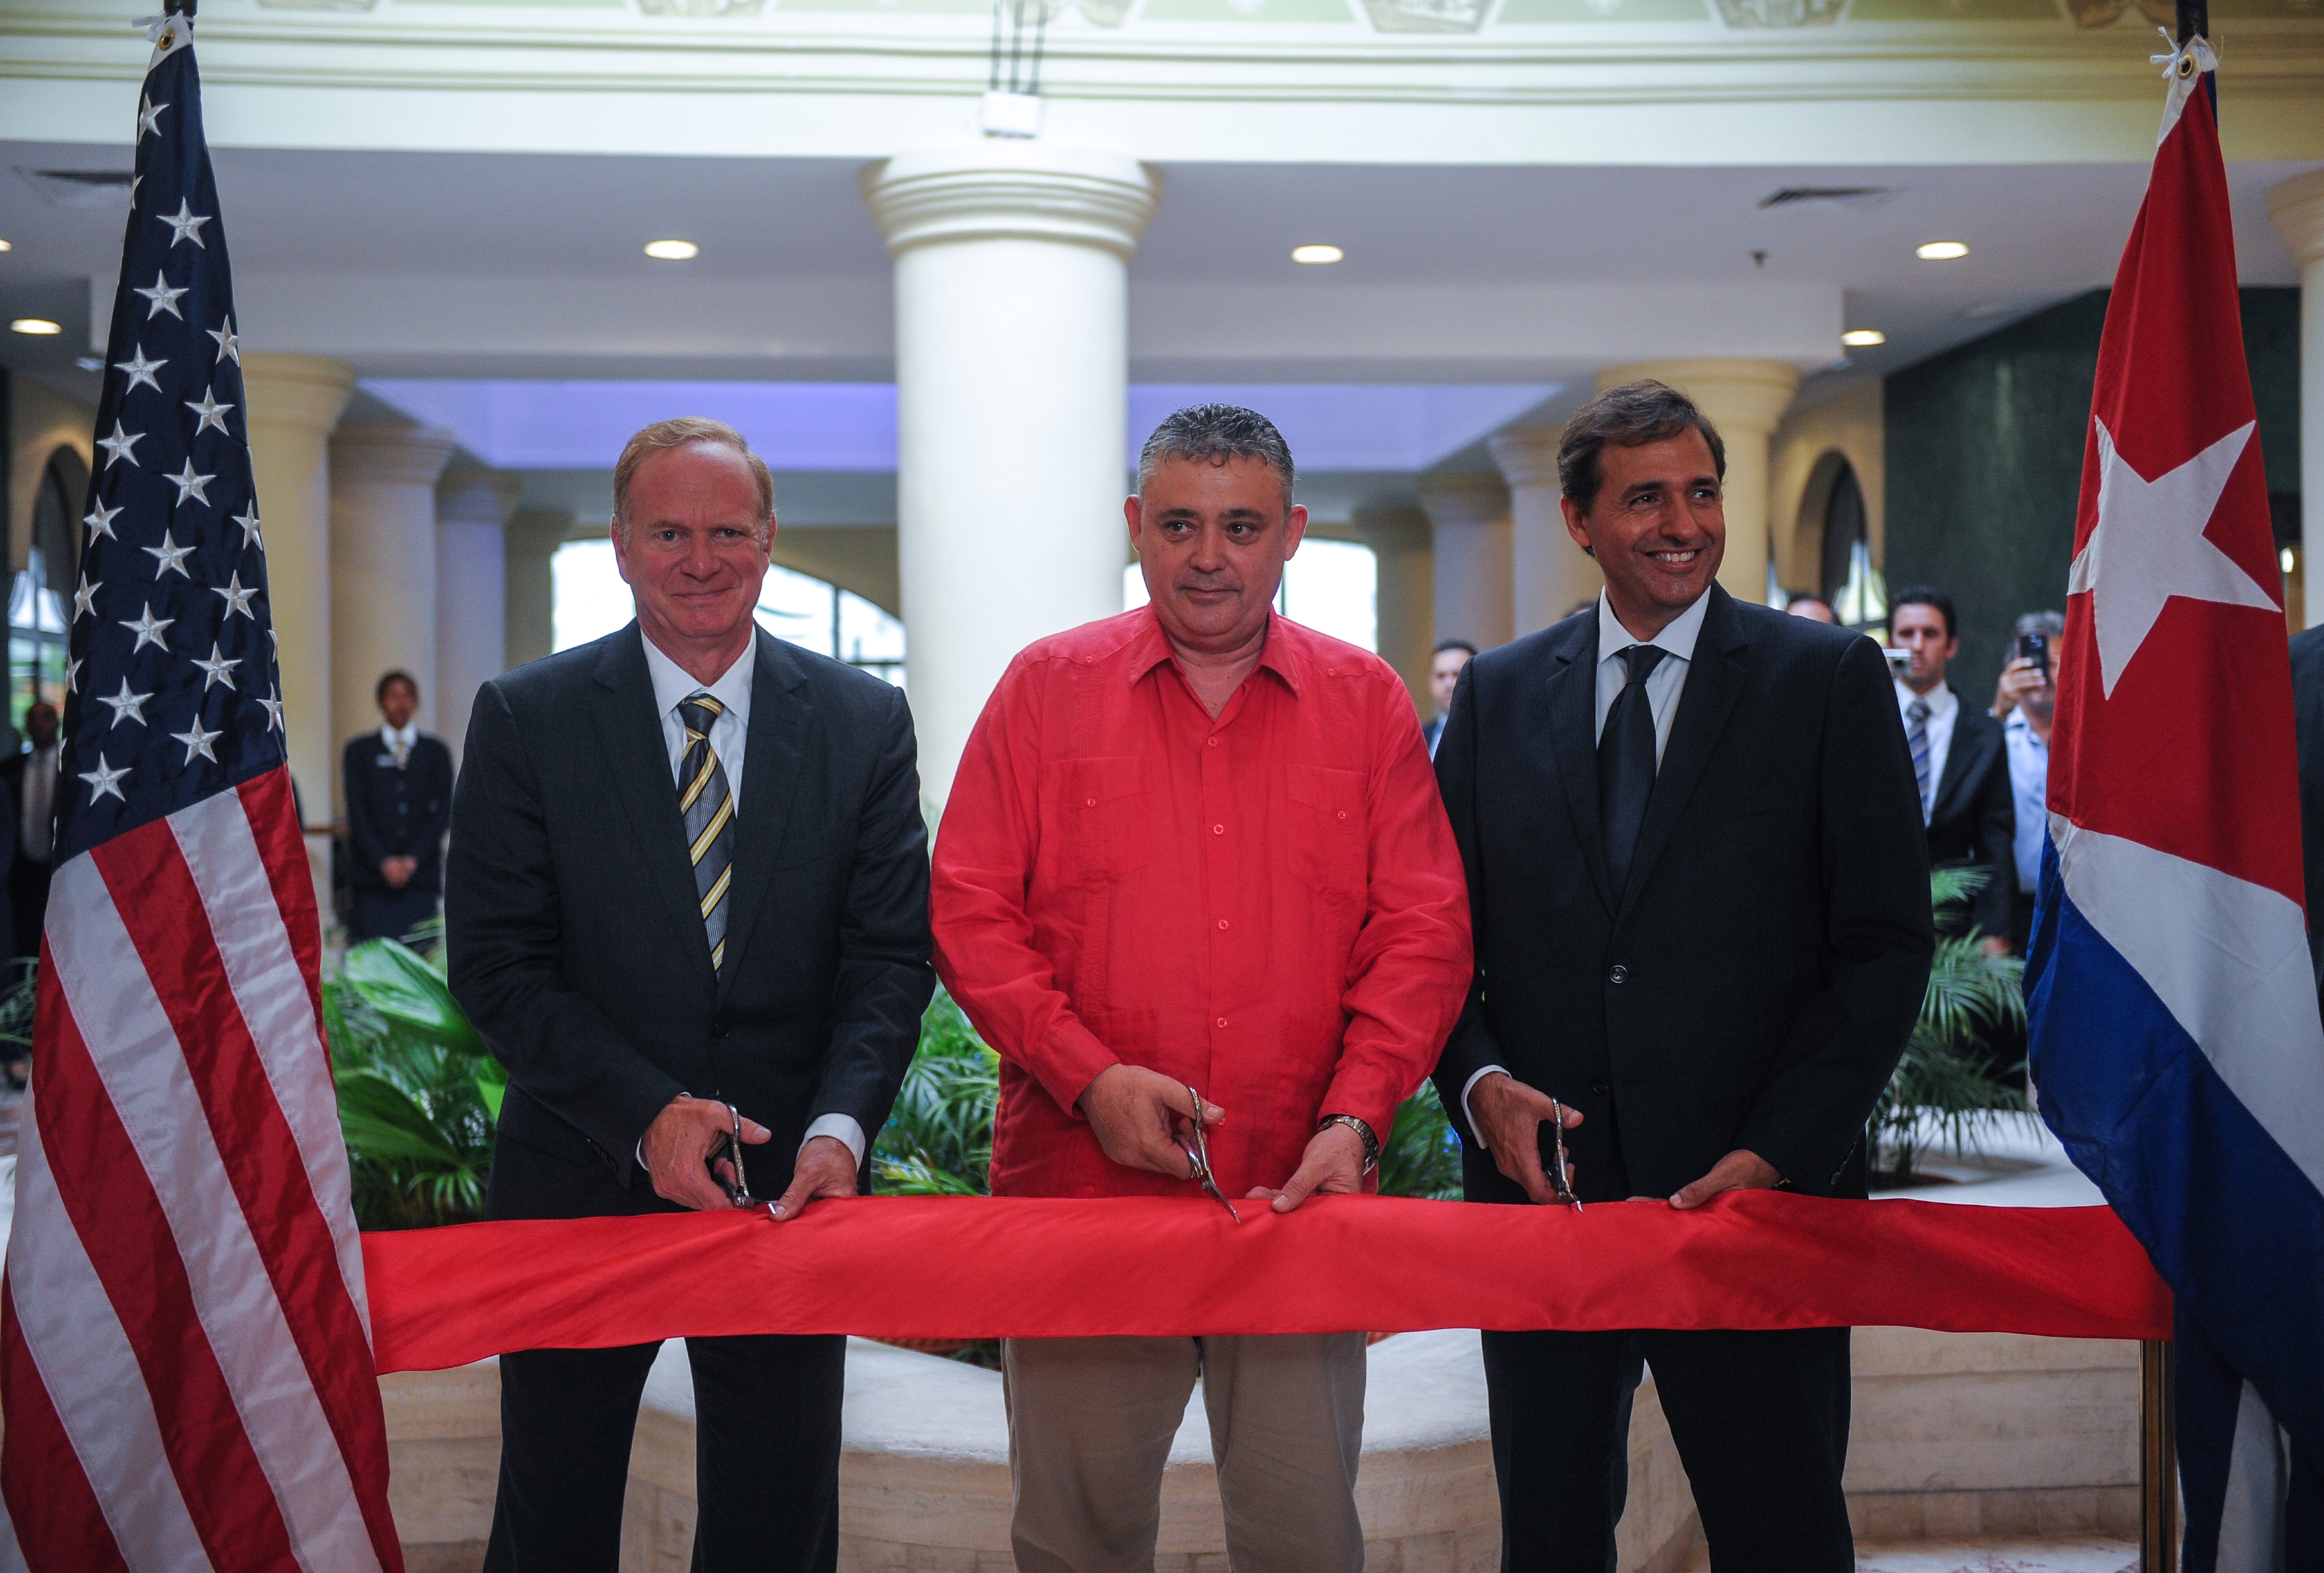 Kenneth S. Siegel, Chief Administrative Officer and General Counsel of Starwood Hotels & Resorts (L), the chairman of the Gaviota Group Carlos Latuff Carmenate (C) and Jorge Giannattasio (R), Chief of Latin American Operation, Starwood Hotels & Resorts, during inauguration of the Four Points by Sheraton hotel in Havana, on June 28, 2016.   / AFP PHOTO / YAMIL LAGE